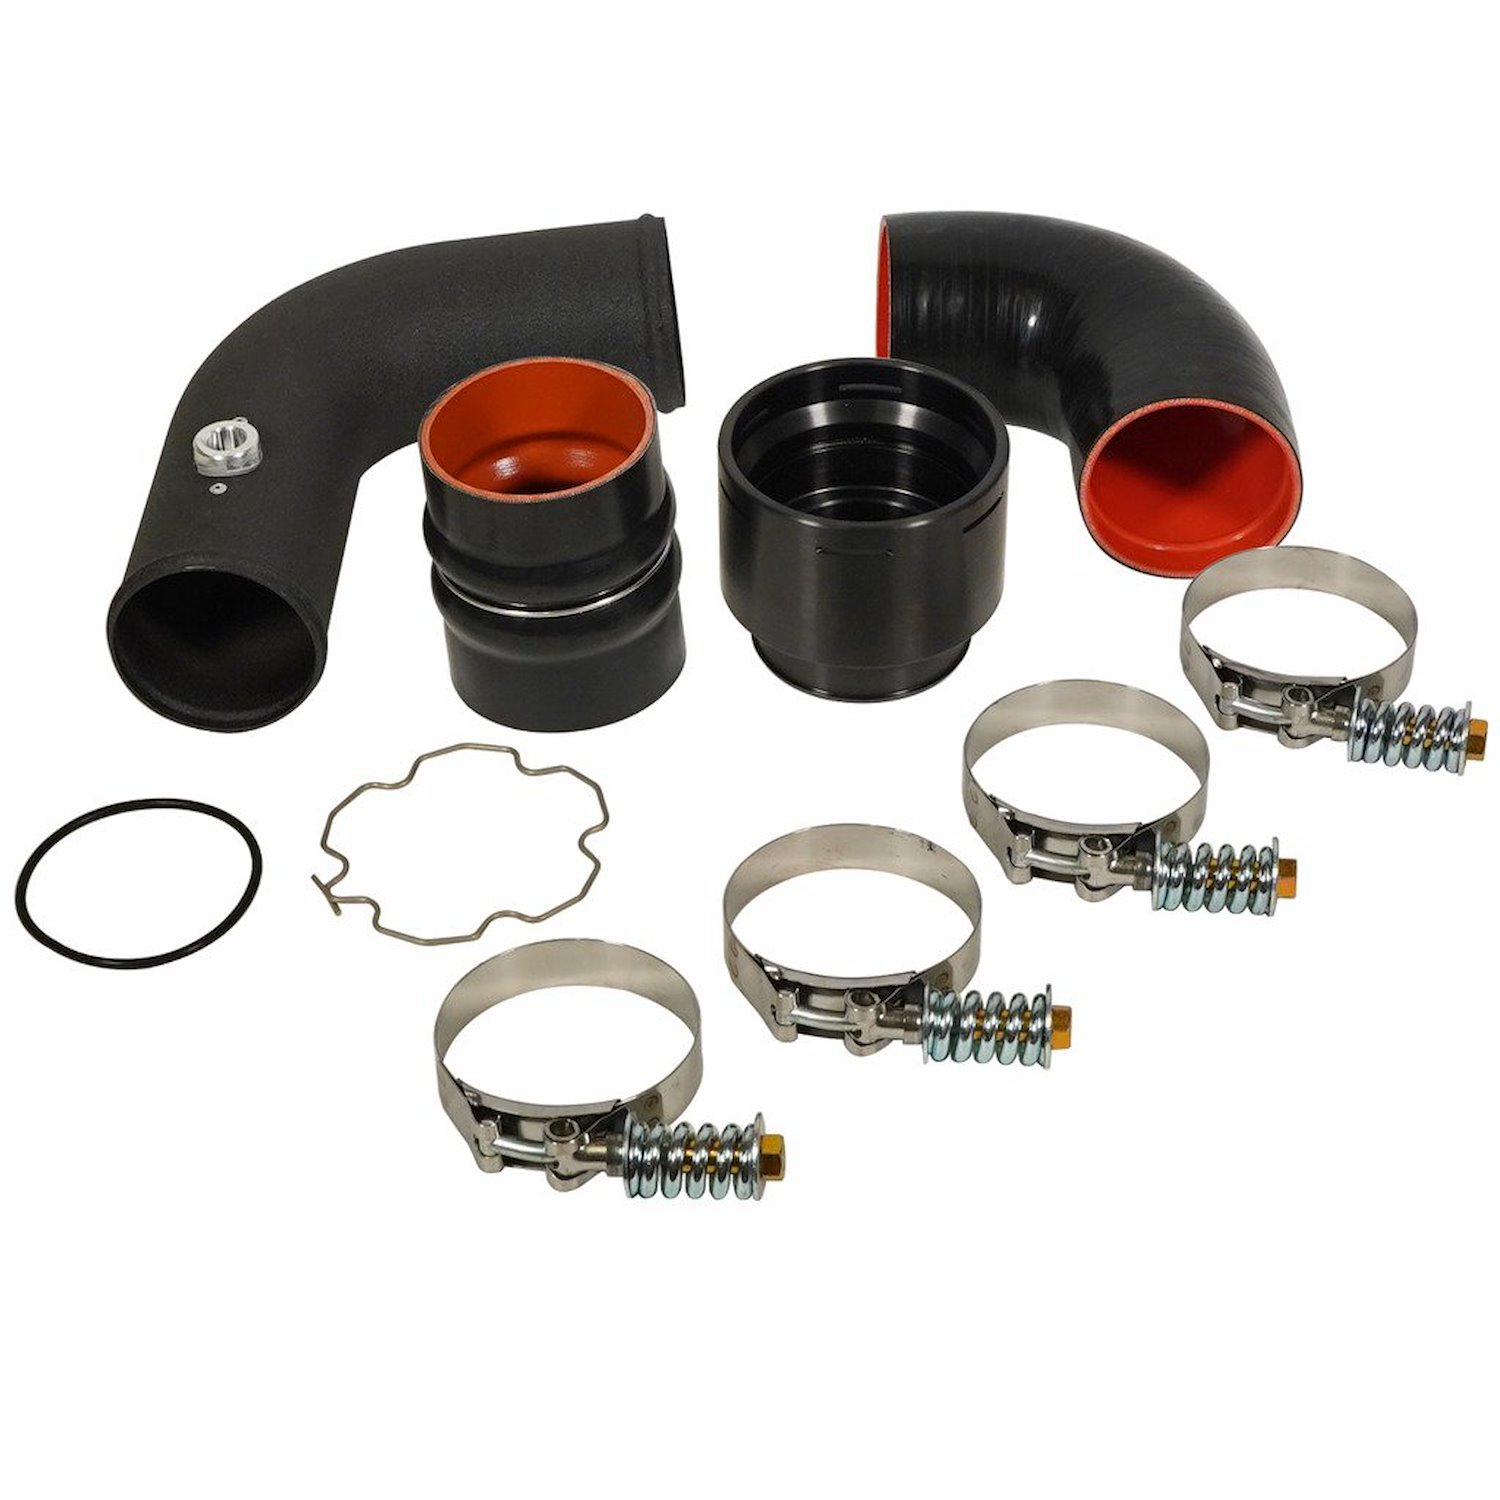 Intercooler Pipe/Clamp [CAC] Upgrade Kit For 2011-2016 Ford 6.7L Powerstroke